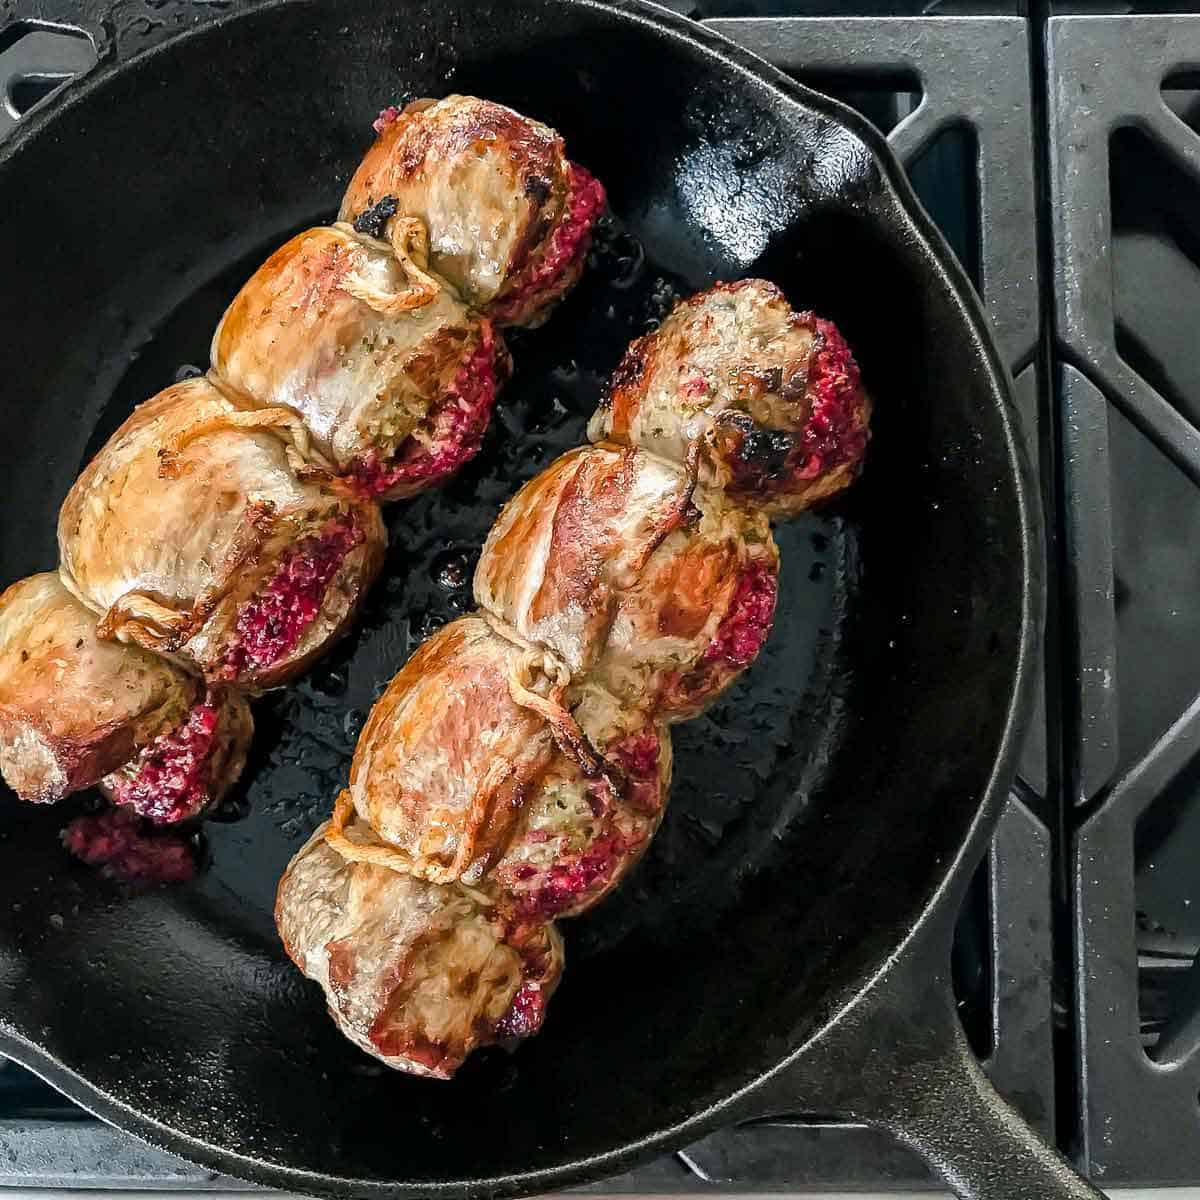 Pan seared rolled and tied lamb stuffed with cranberry pesto.